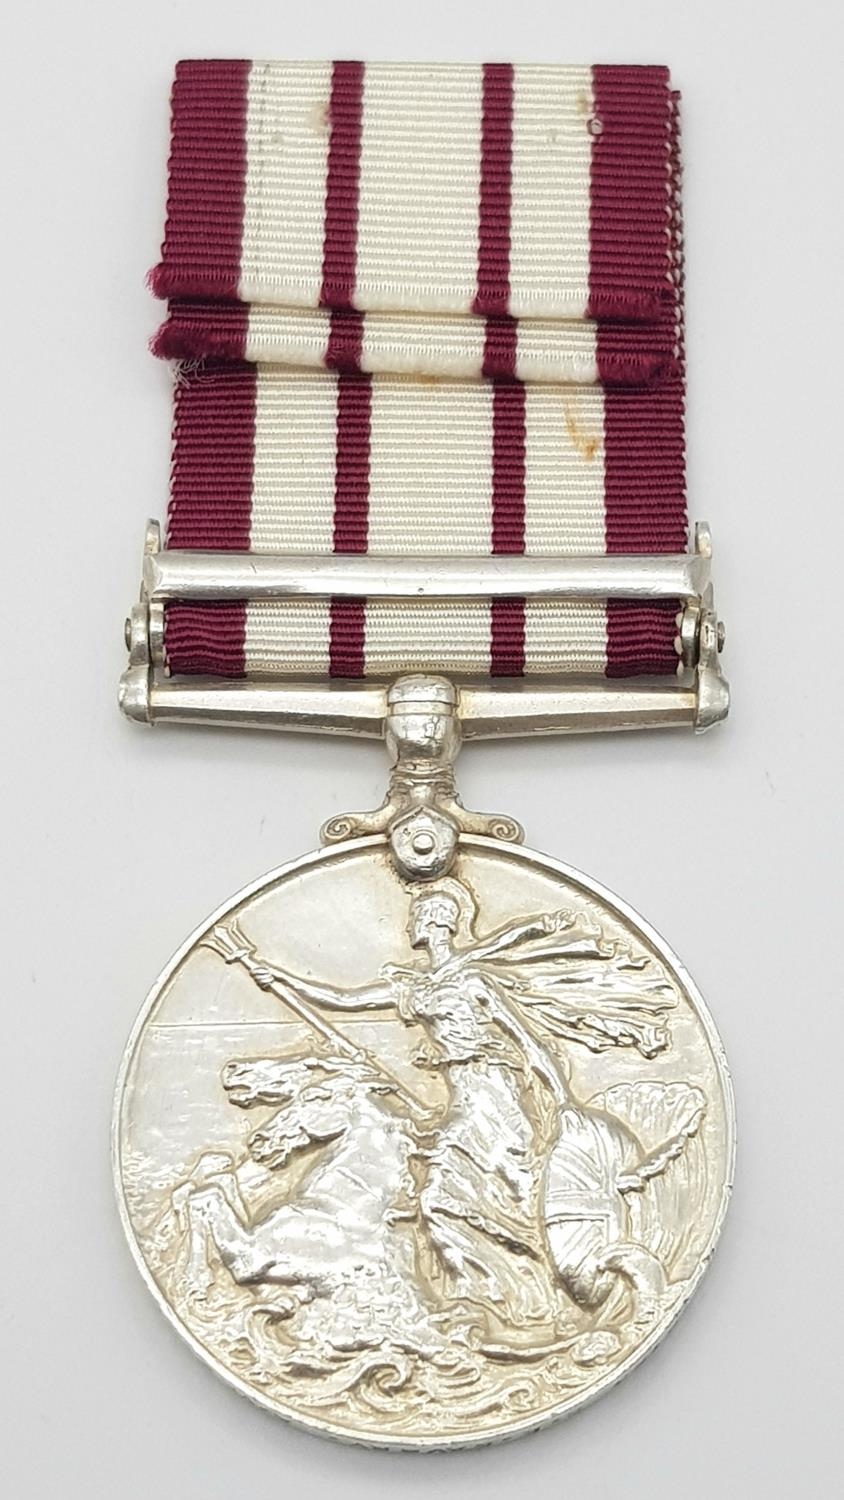 Naval General Service Medal 1915, with clasp Palestine 1936-1939. Named to: D/J99753 S E Savory A/ - Image 2 of 4